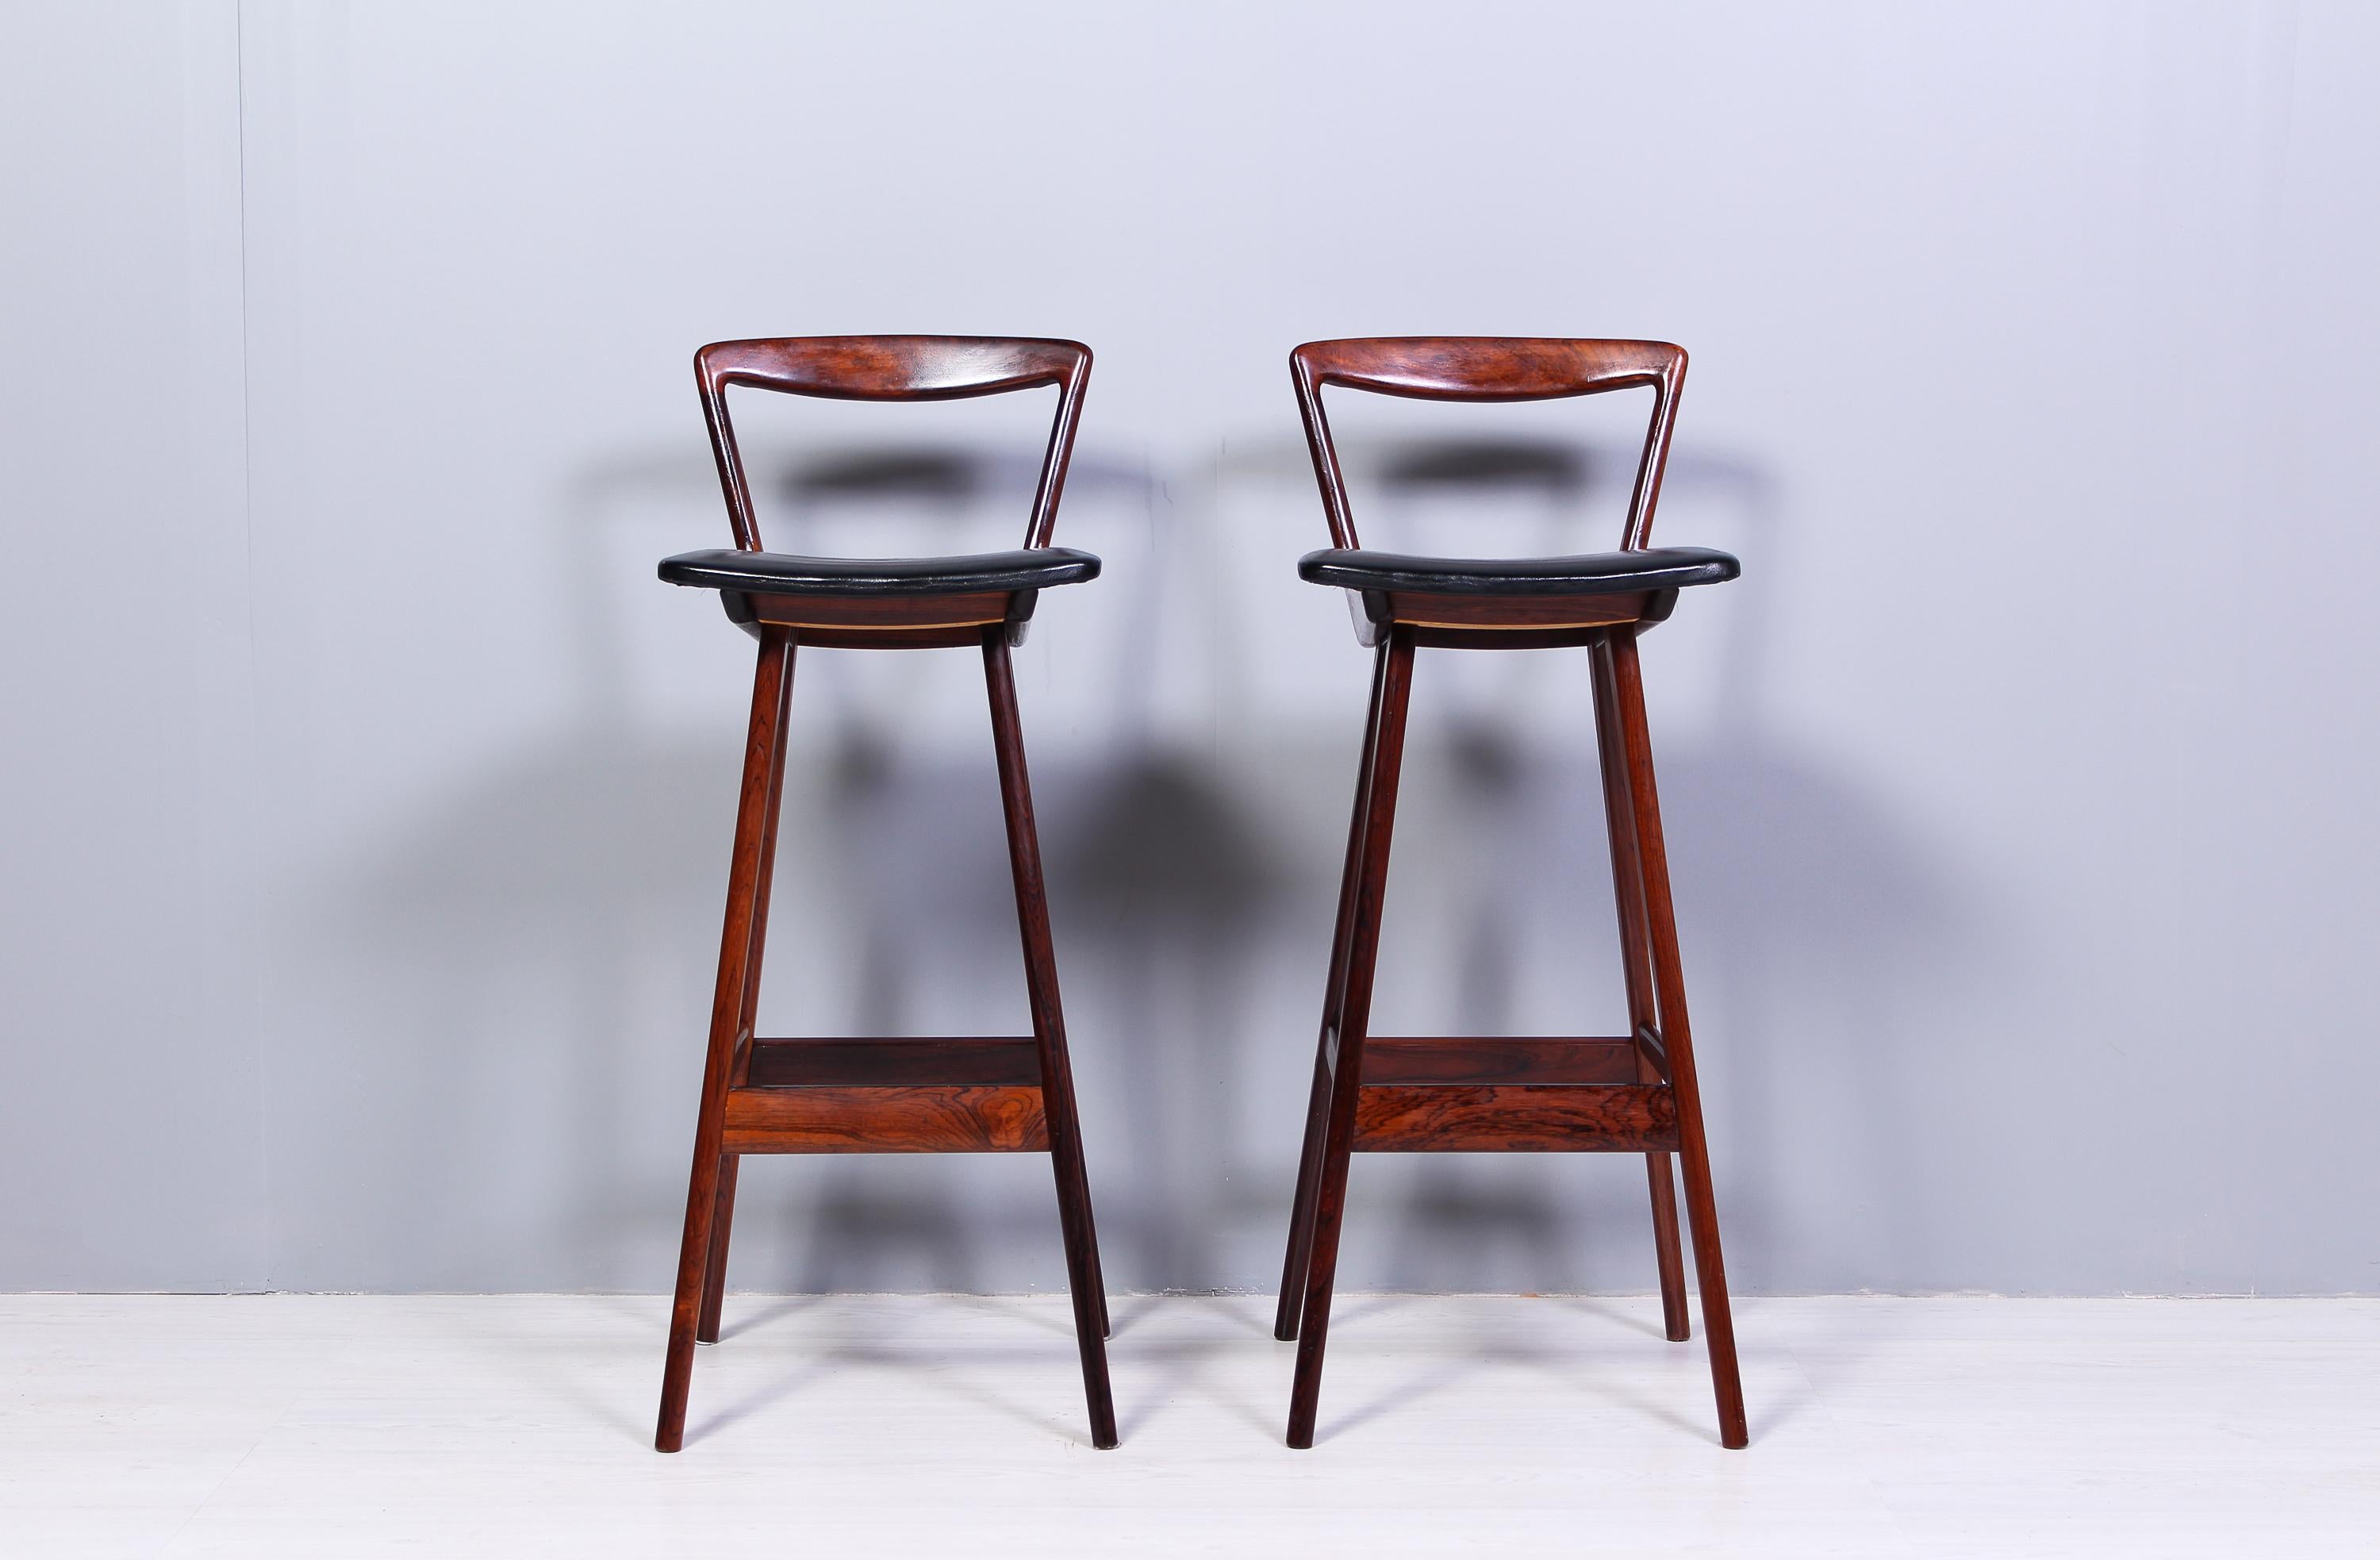 A very rare set of two rosewood bar stools by Danish designer Henry Rosengren Hansen. The stools were produced by Brande Møbelfabrik in Denmark during the 1950s. The chairs are in very good vintage condition with signs of usage consistent with age.